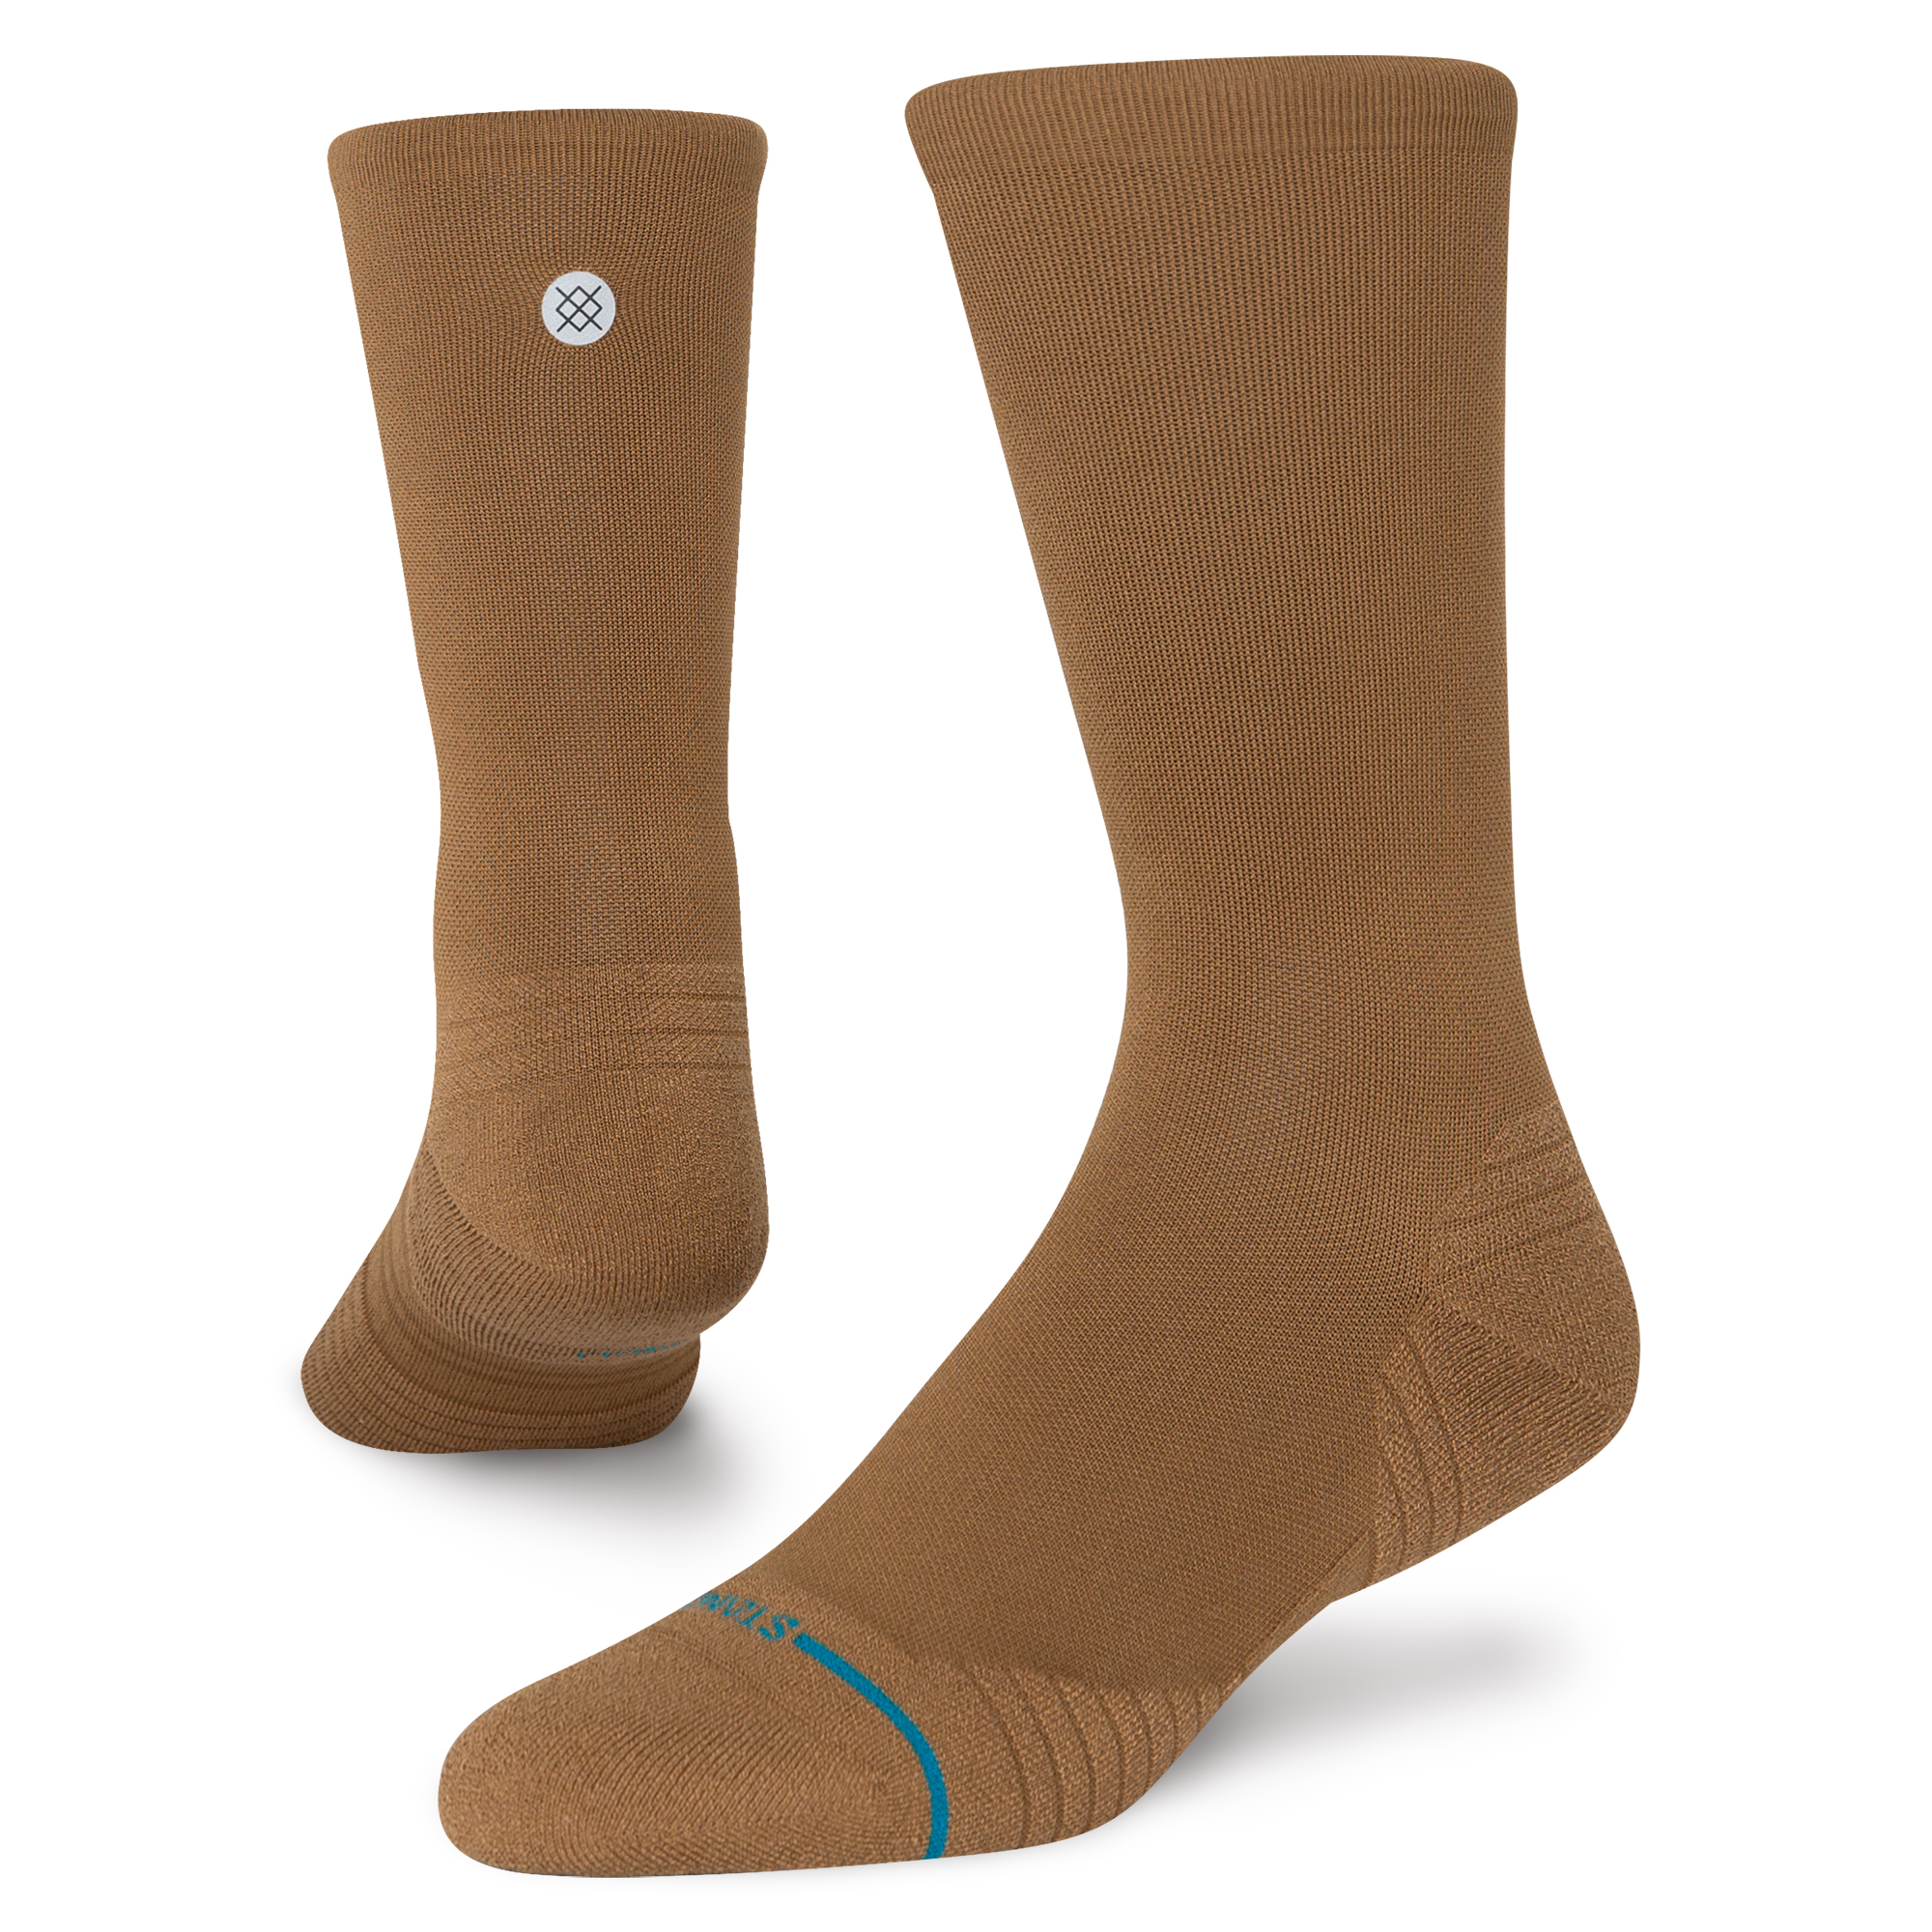 Stance Performance Crew Socks Review - GolfBlogger Golf Blog